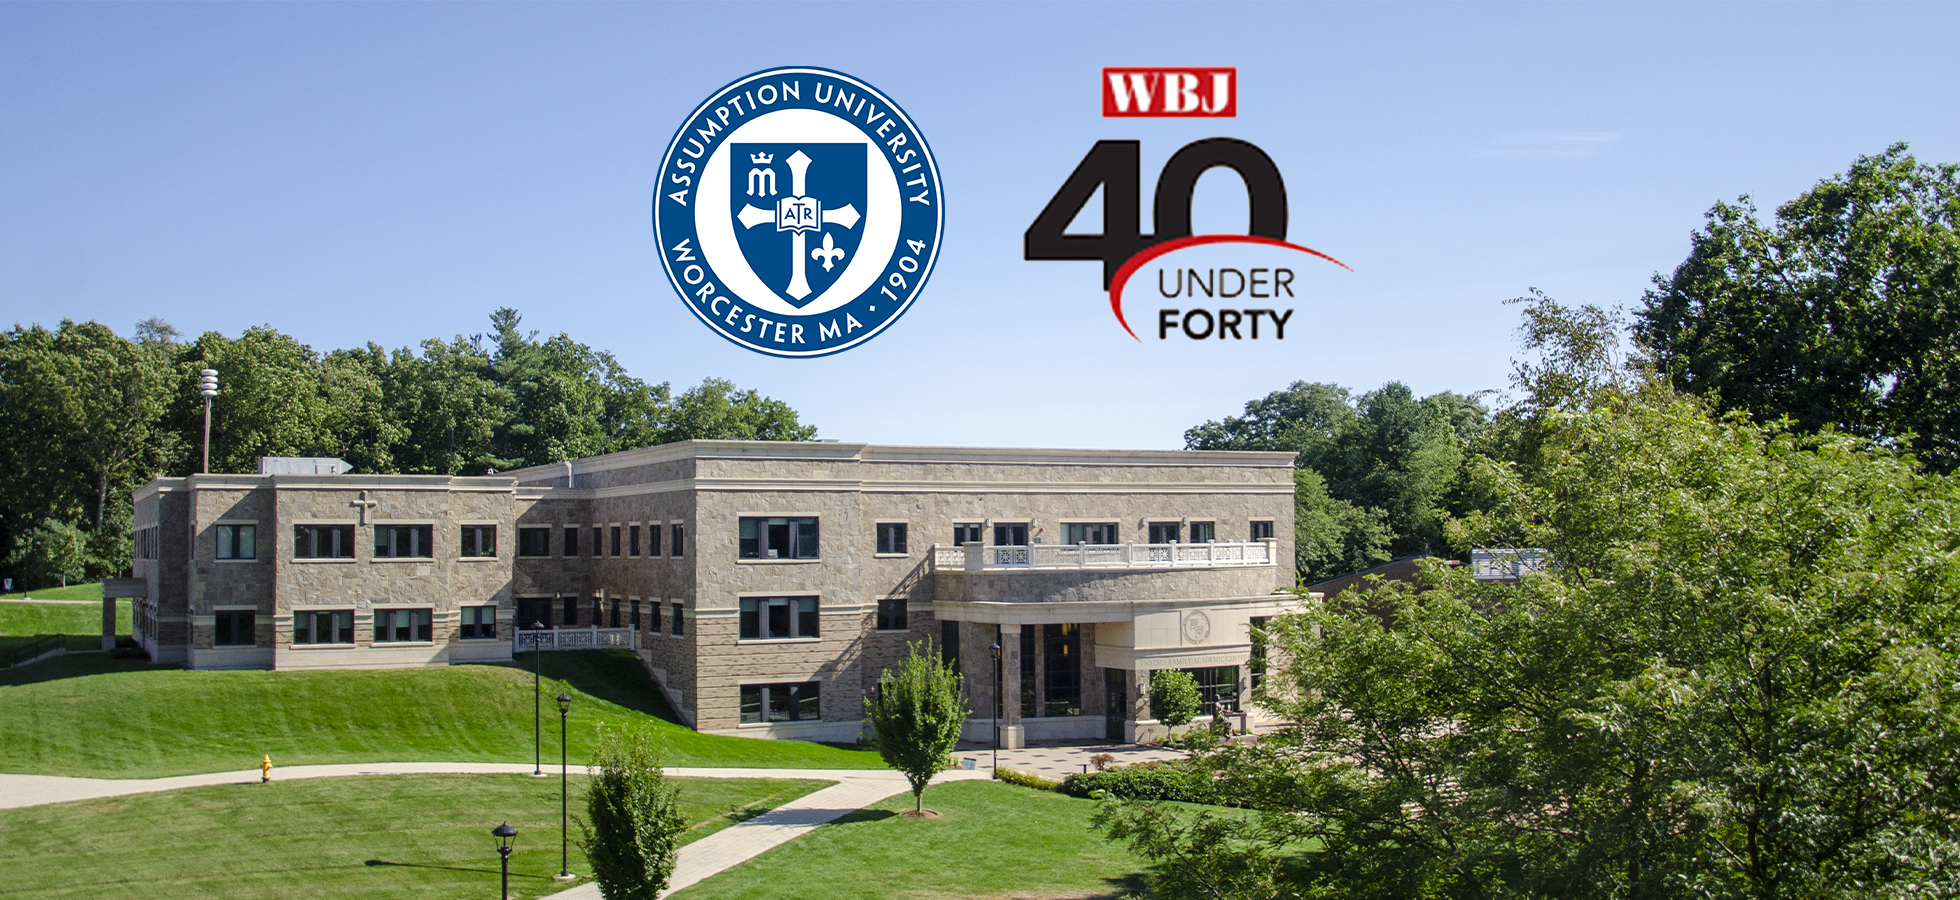 Three Assumption Alumni Named to New England Business Journals 40 Under Forty 